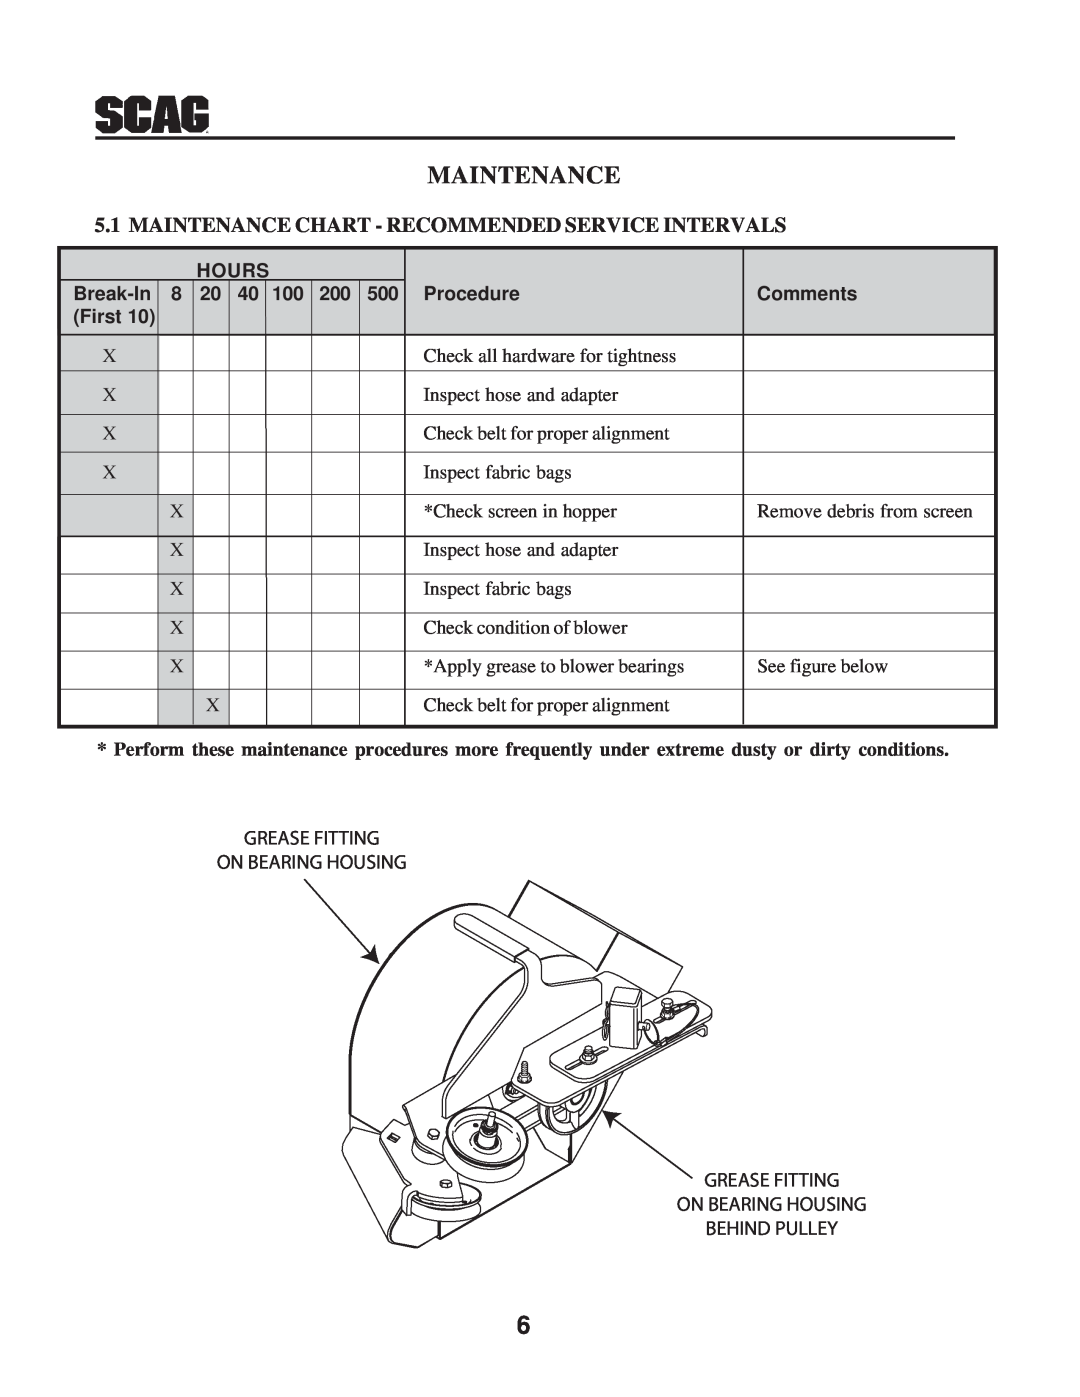 Scag Power Equipment GC-STWC-61V Maintenance Chart - Recommended Service Intervals, Hours, Break-In, Procedure, First 